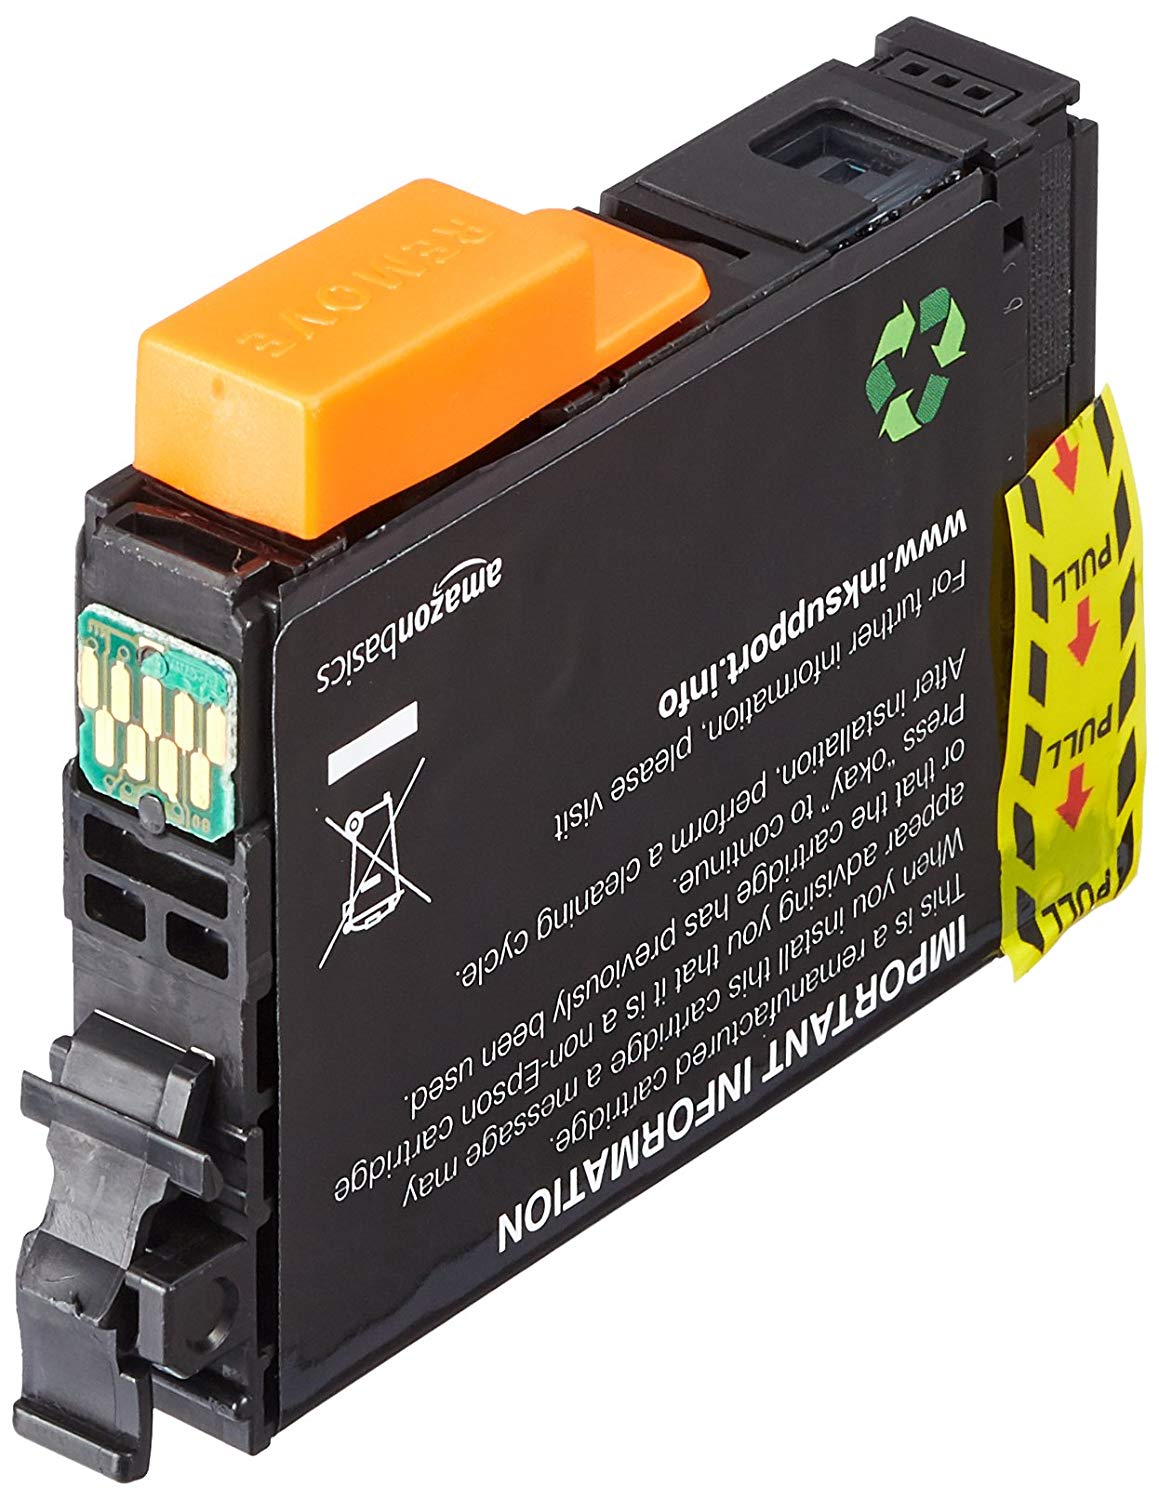 Amazonbasics Remanufactured Ink Cartridge Replacement For Epson Daisy 18 Cyan Bigamart 1476